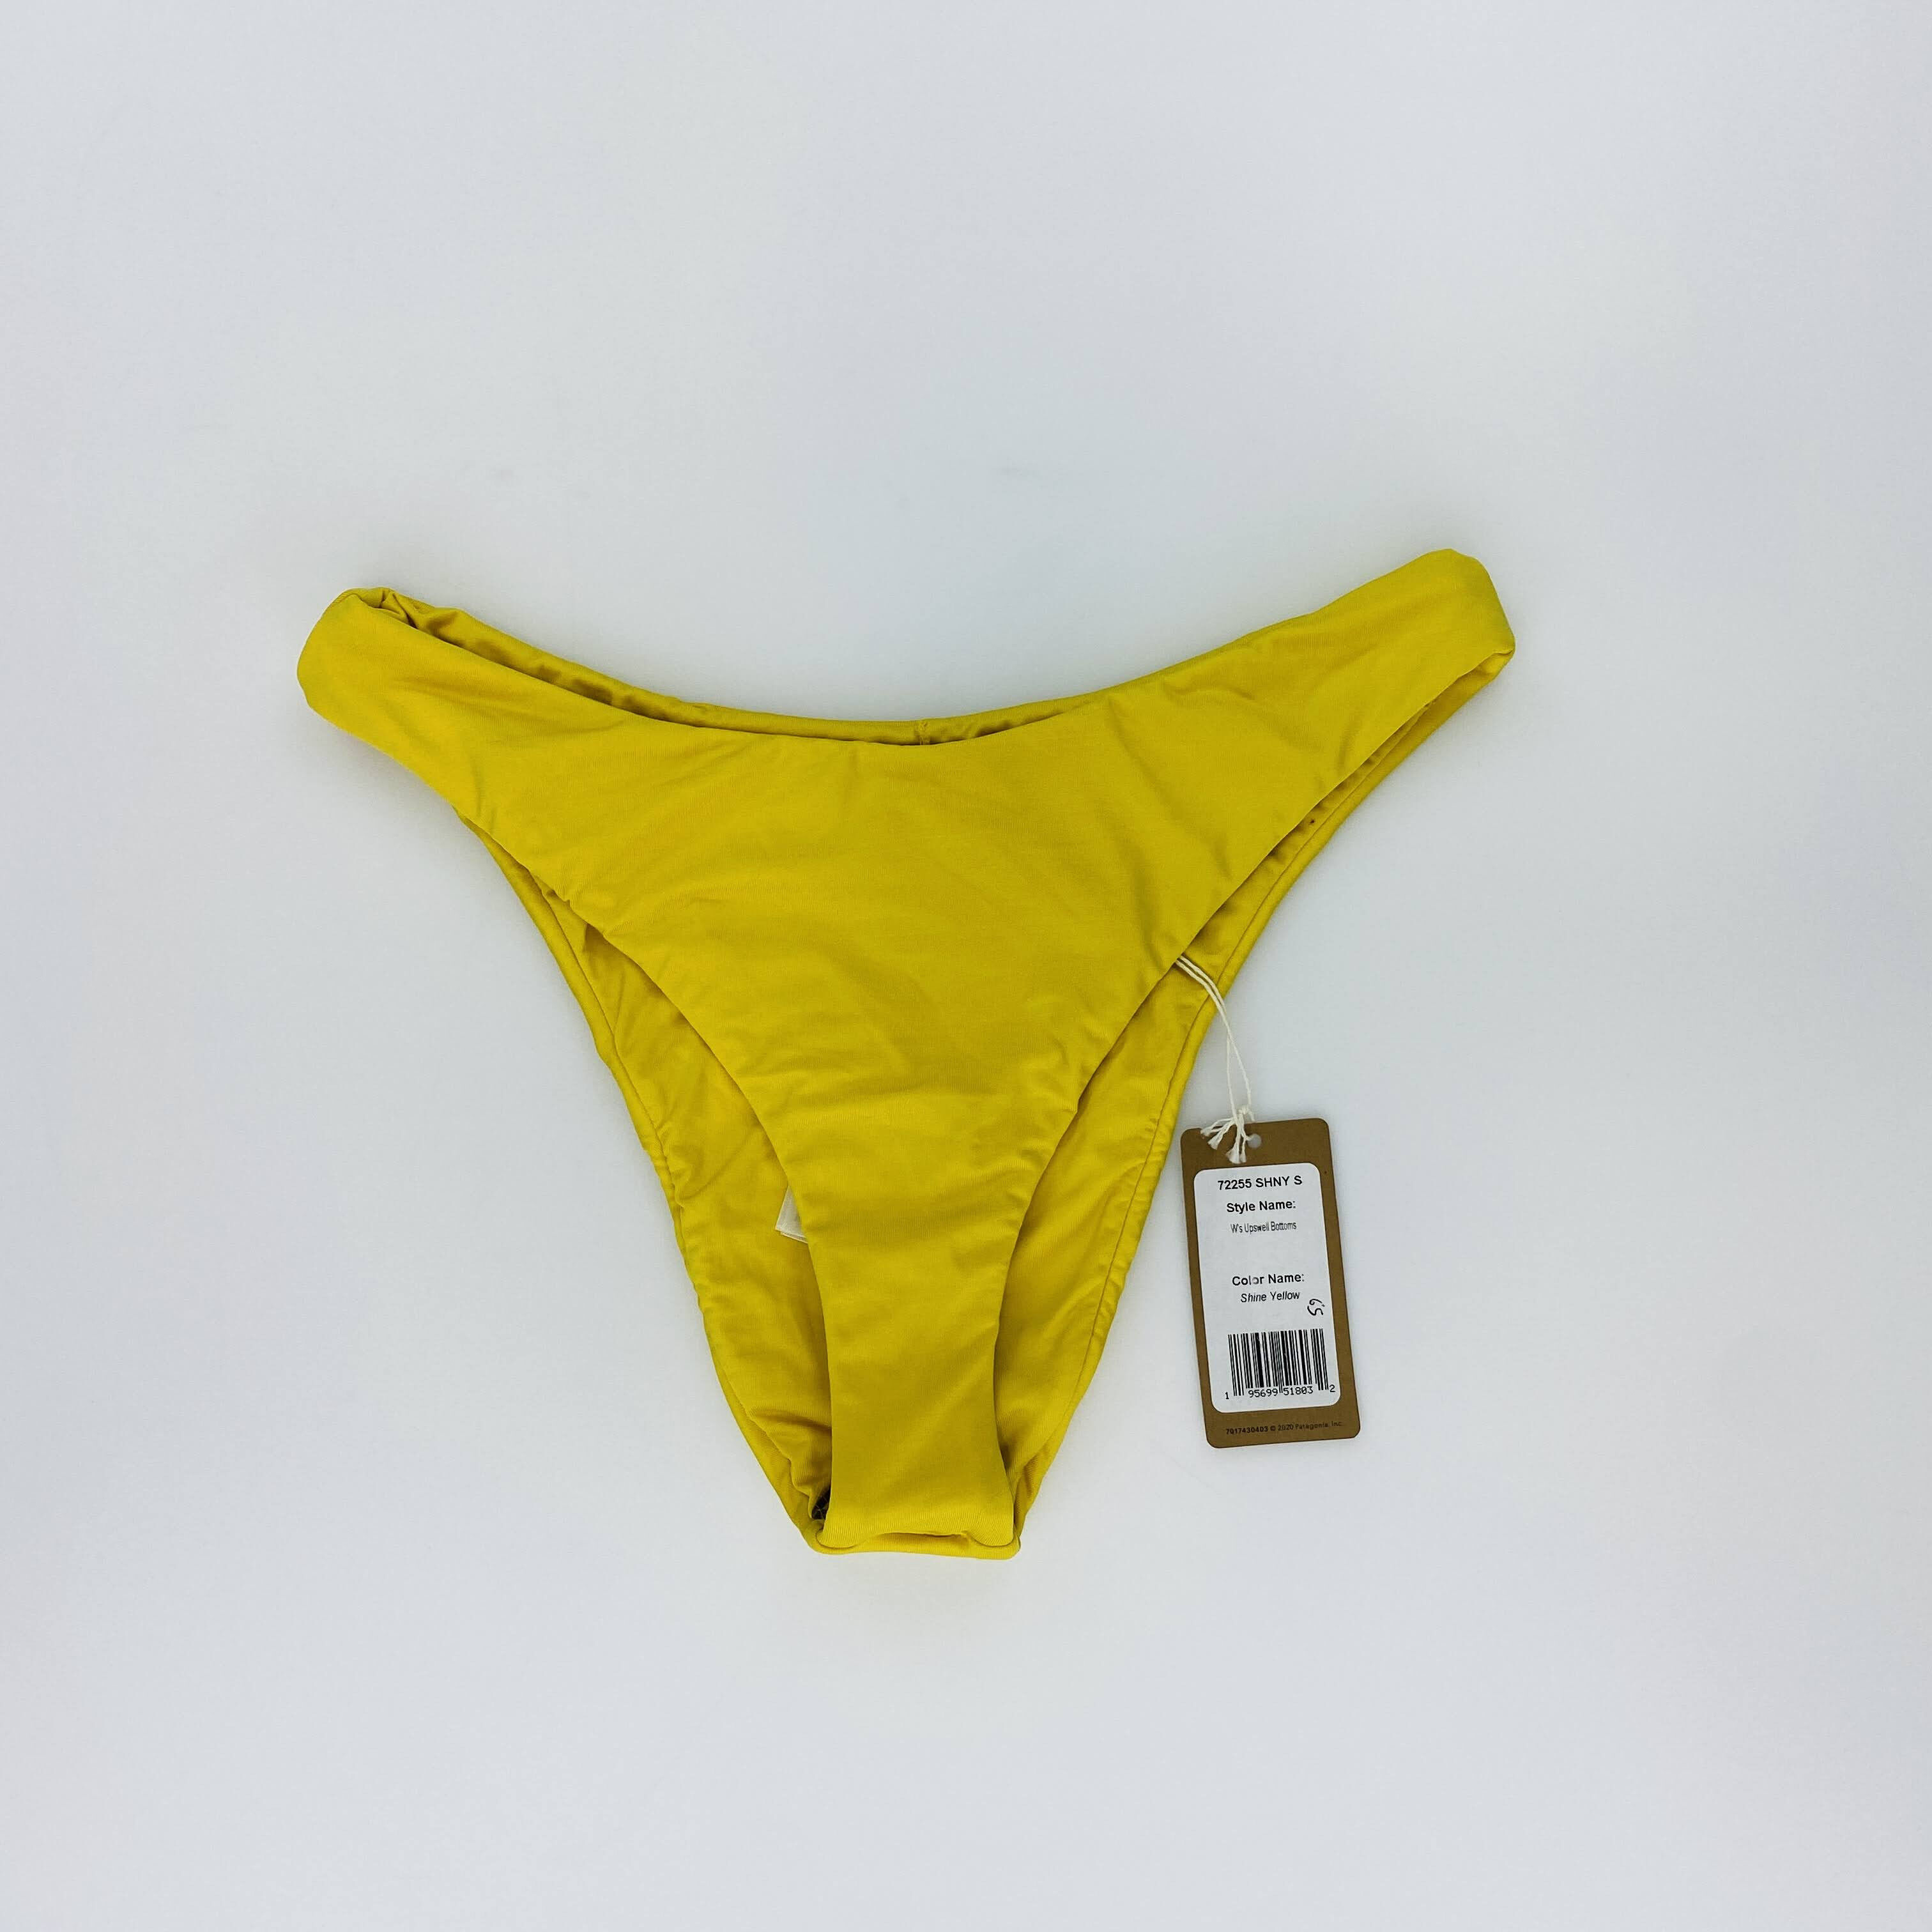 Patagonia W's Upswell Bottoms - Seconde main Bas maillot de bain 2 pièces femme - Jaune - S | Hardloop